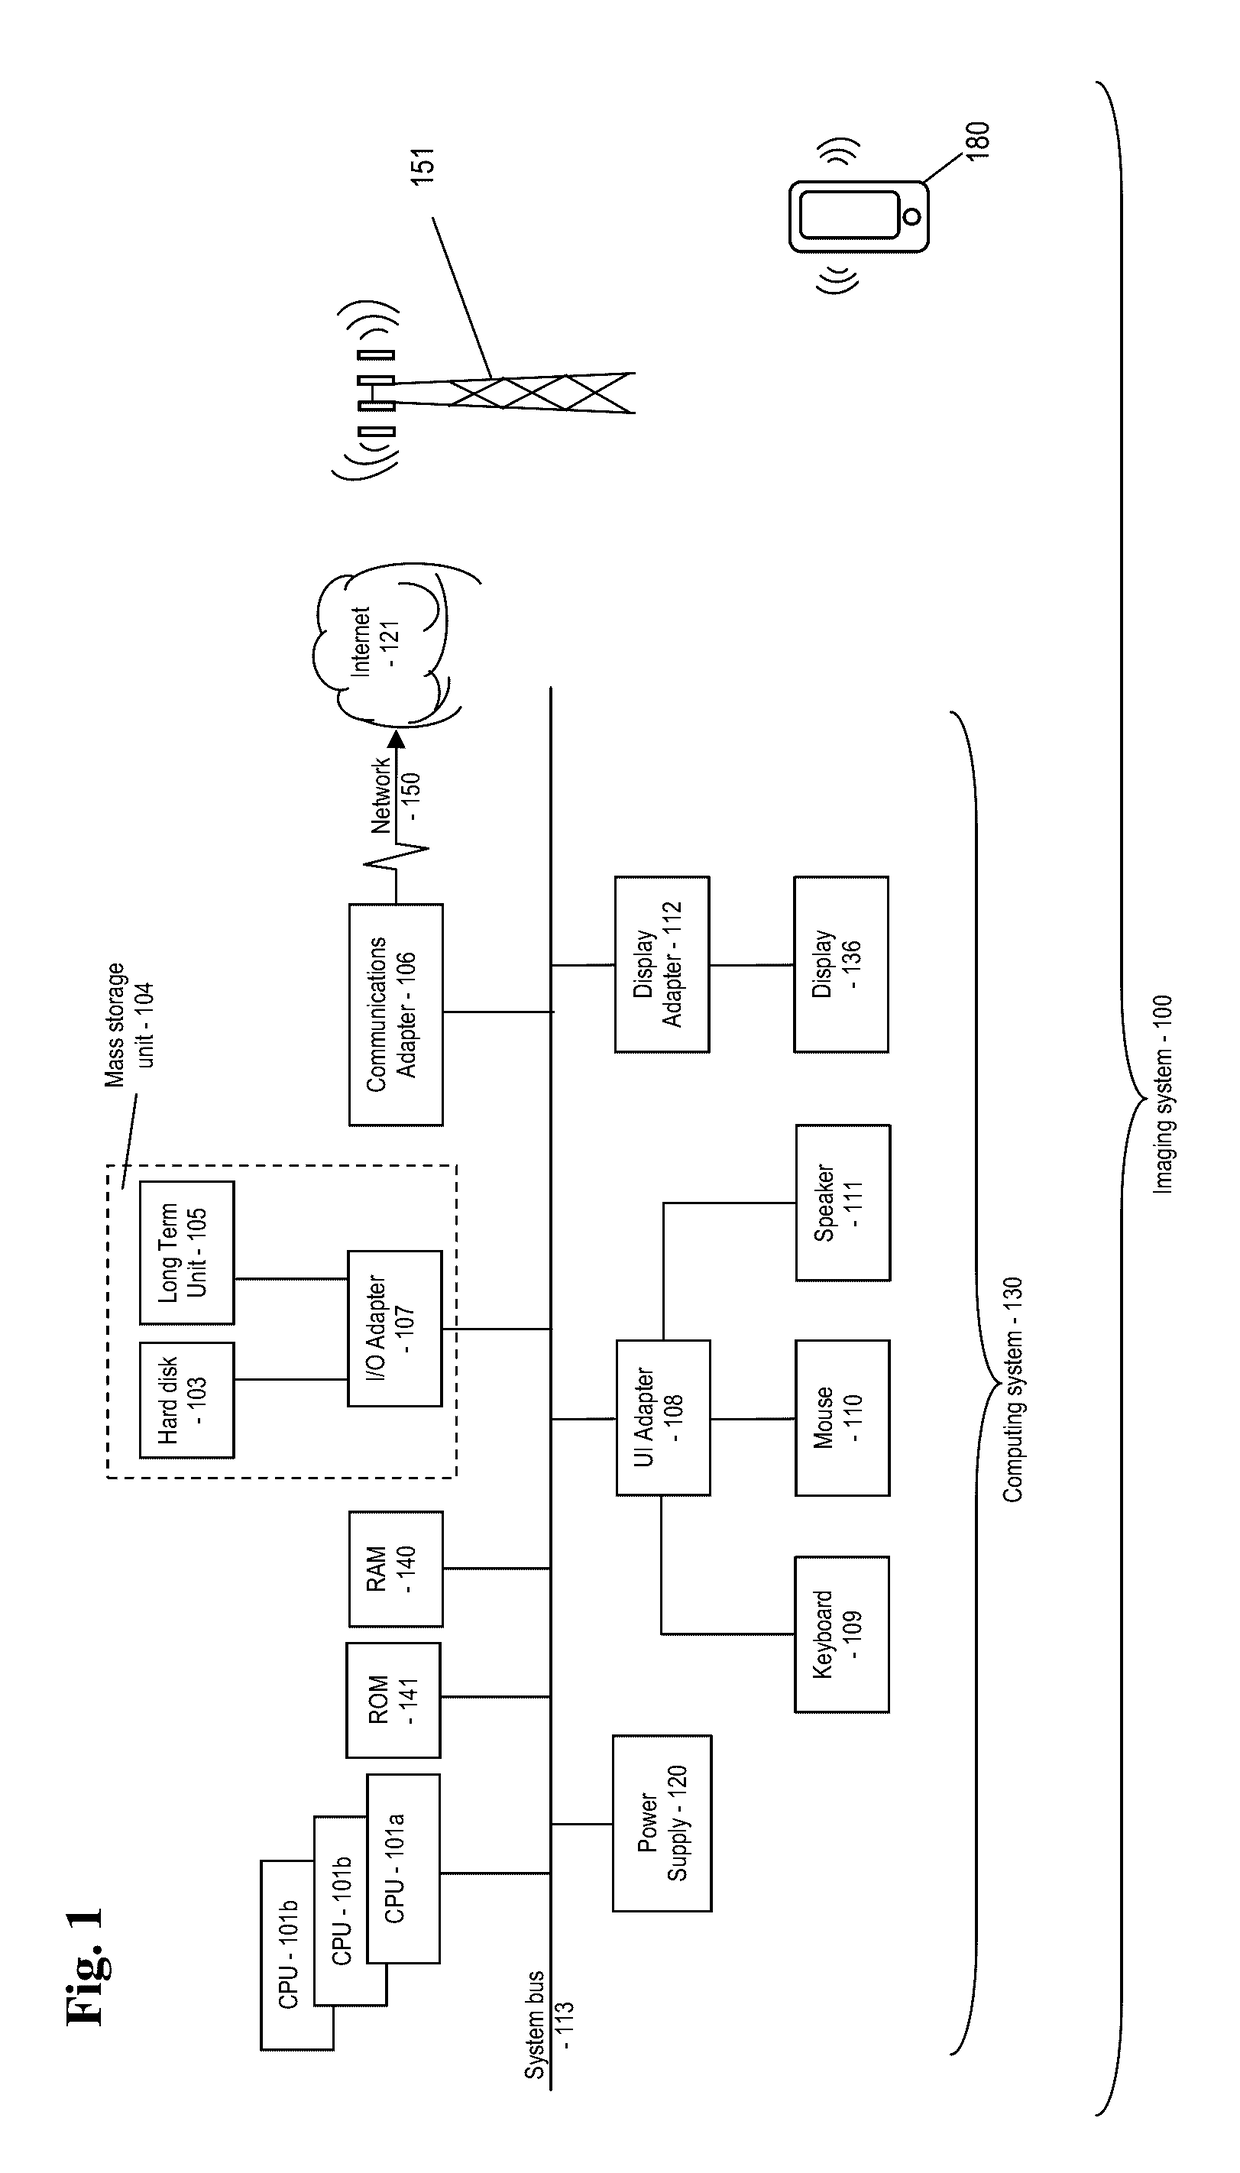 Method and apparatus of multi-frame super resolution robust to local and global motion